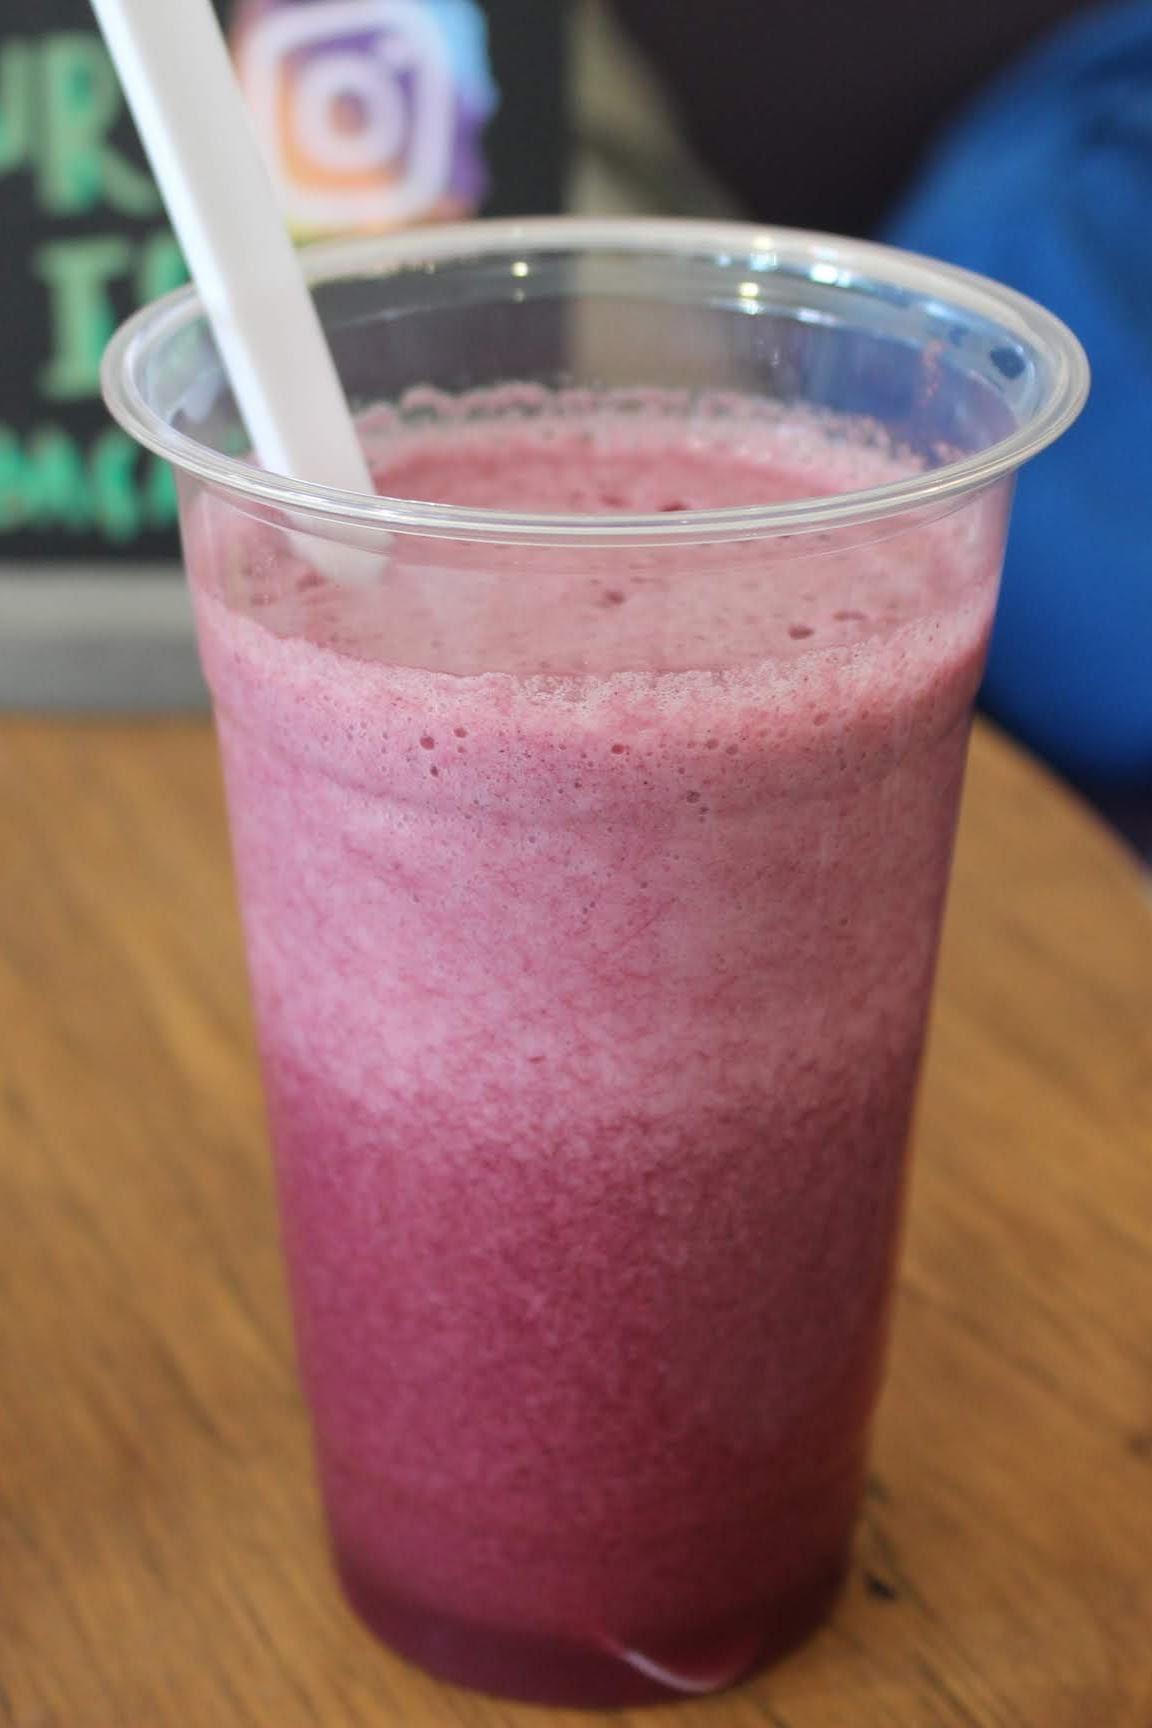 The Detox juice is foamy and vibrant, and makes you feel just as vibrant on the inside. Credit: Abby Sourwine / The Foothill Dragon Press